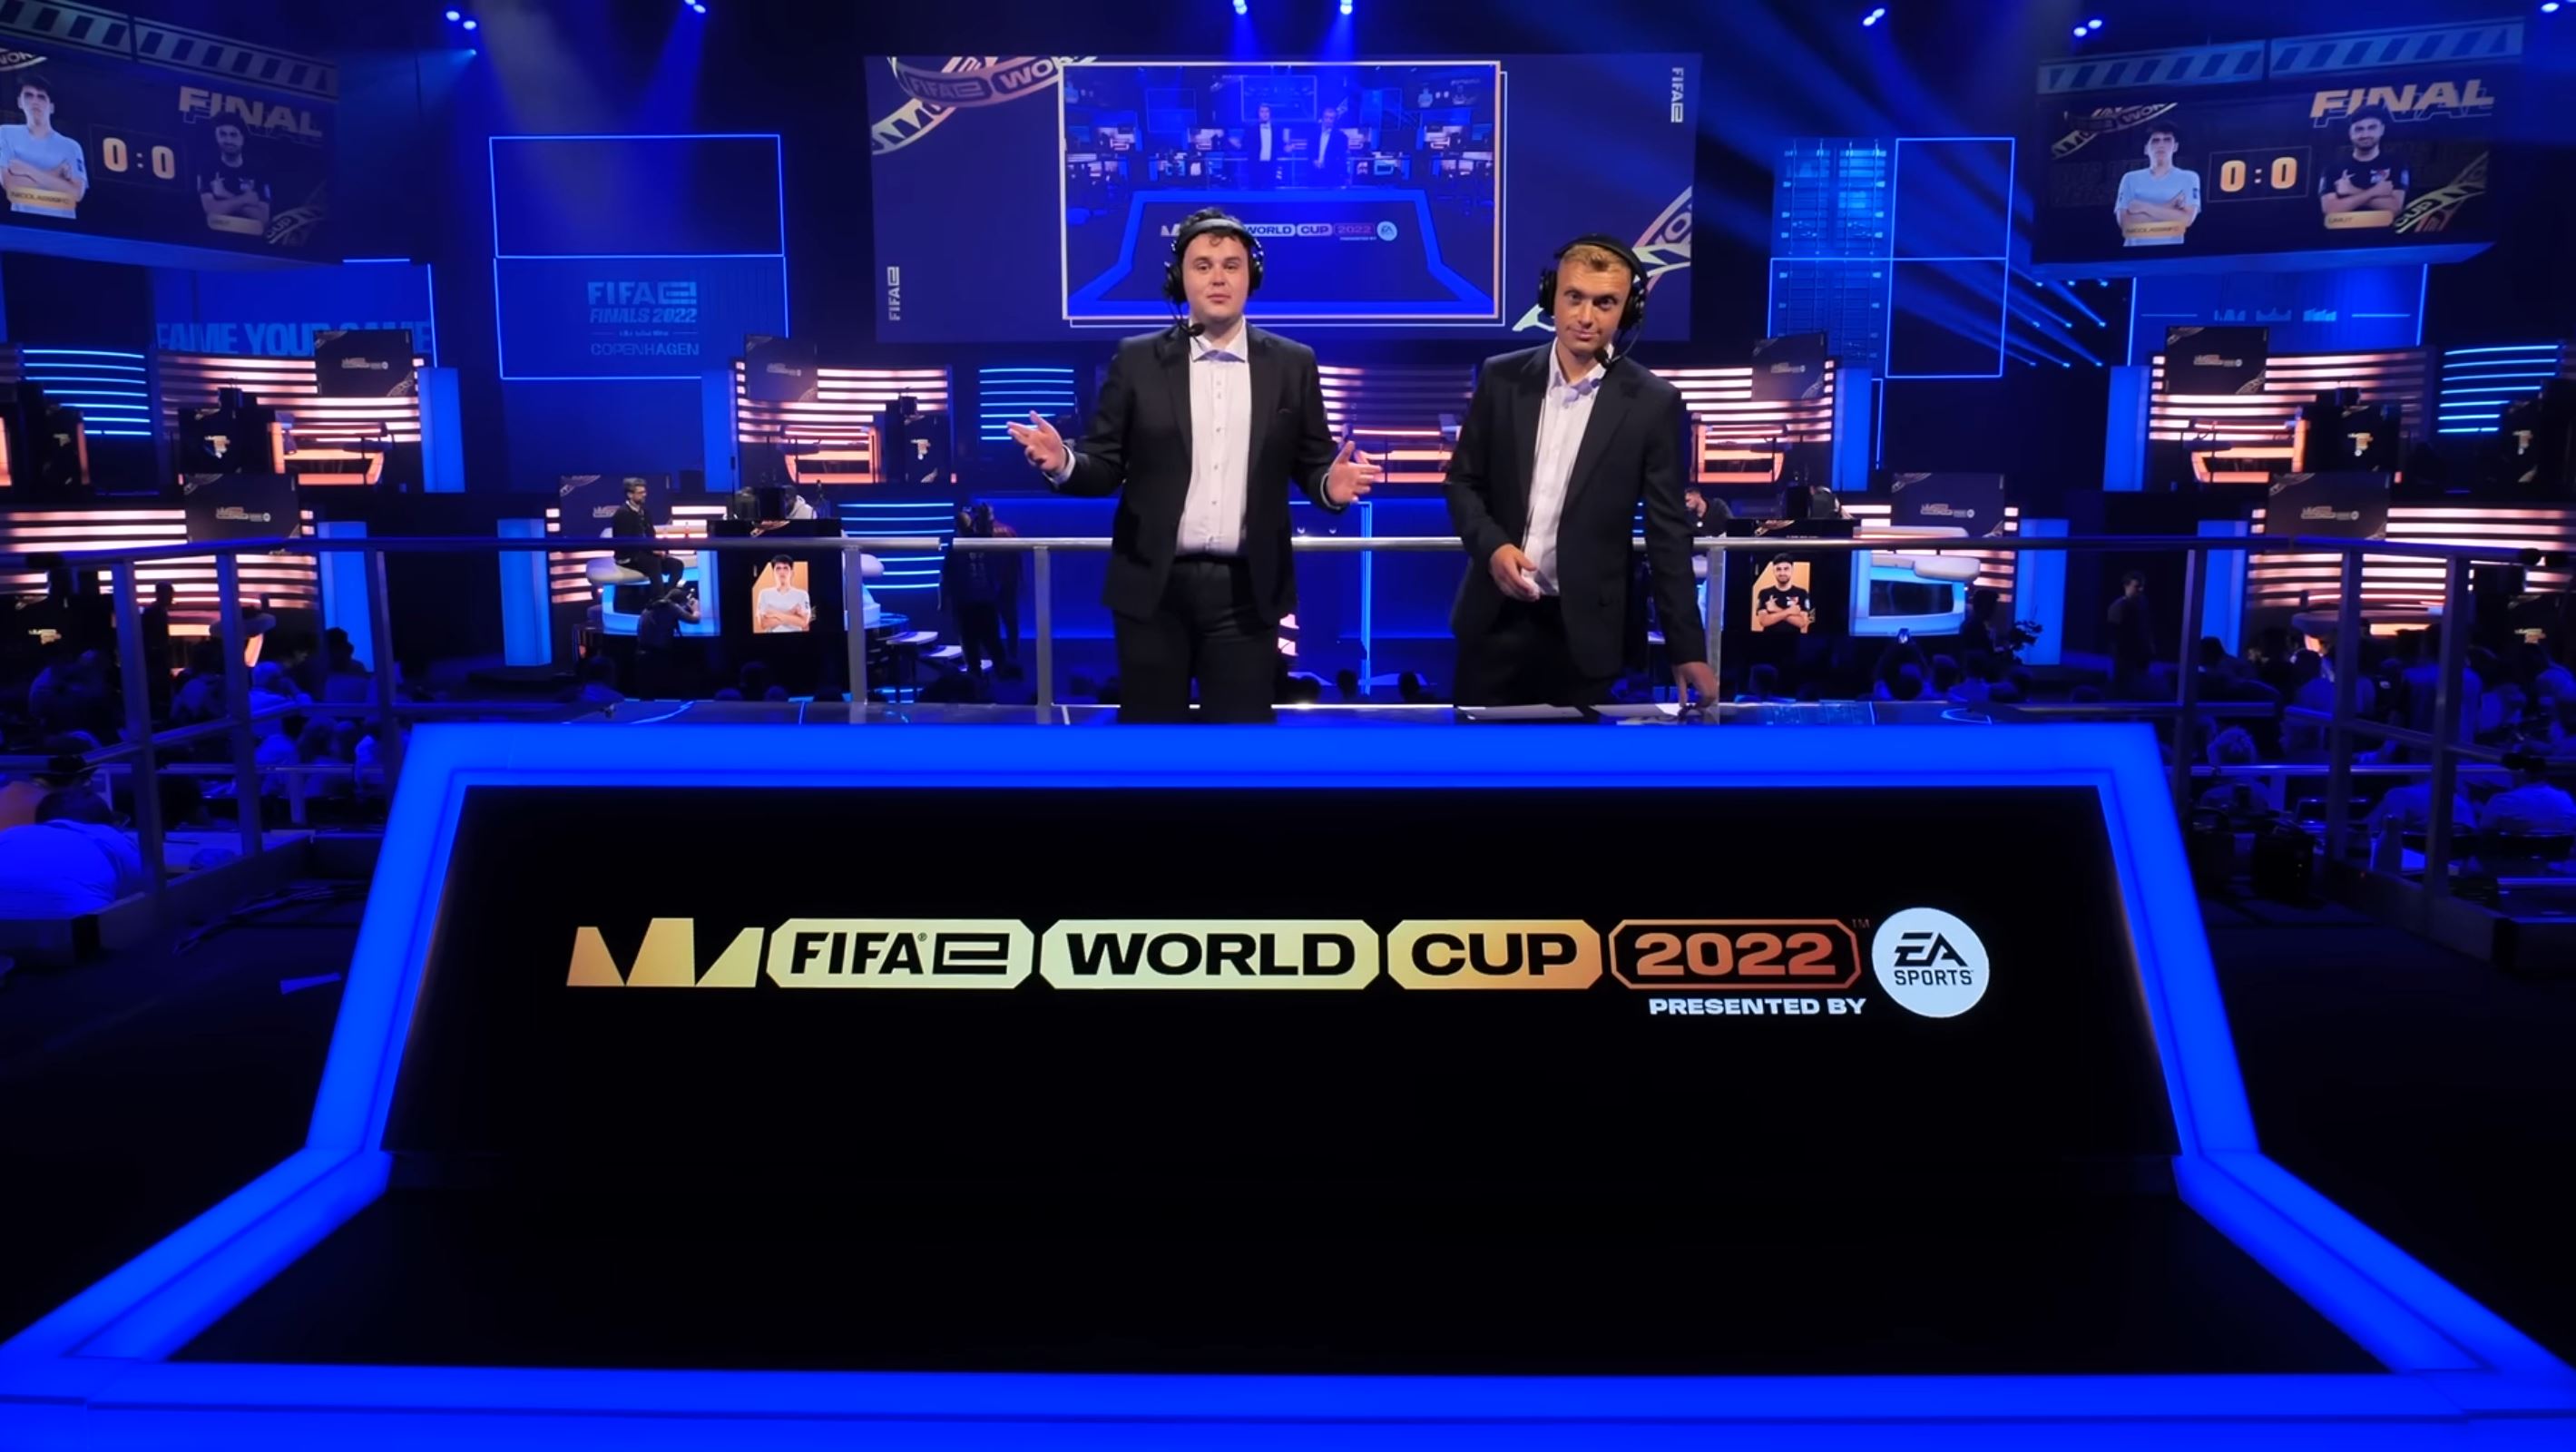 Live stream of the FIFA 22 World Cup - Speakers